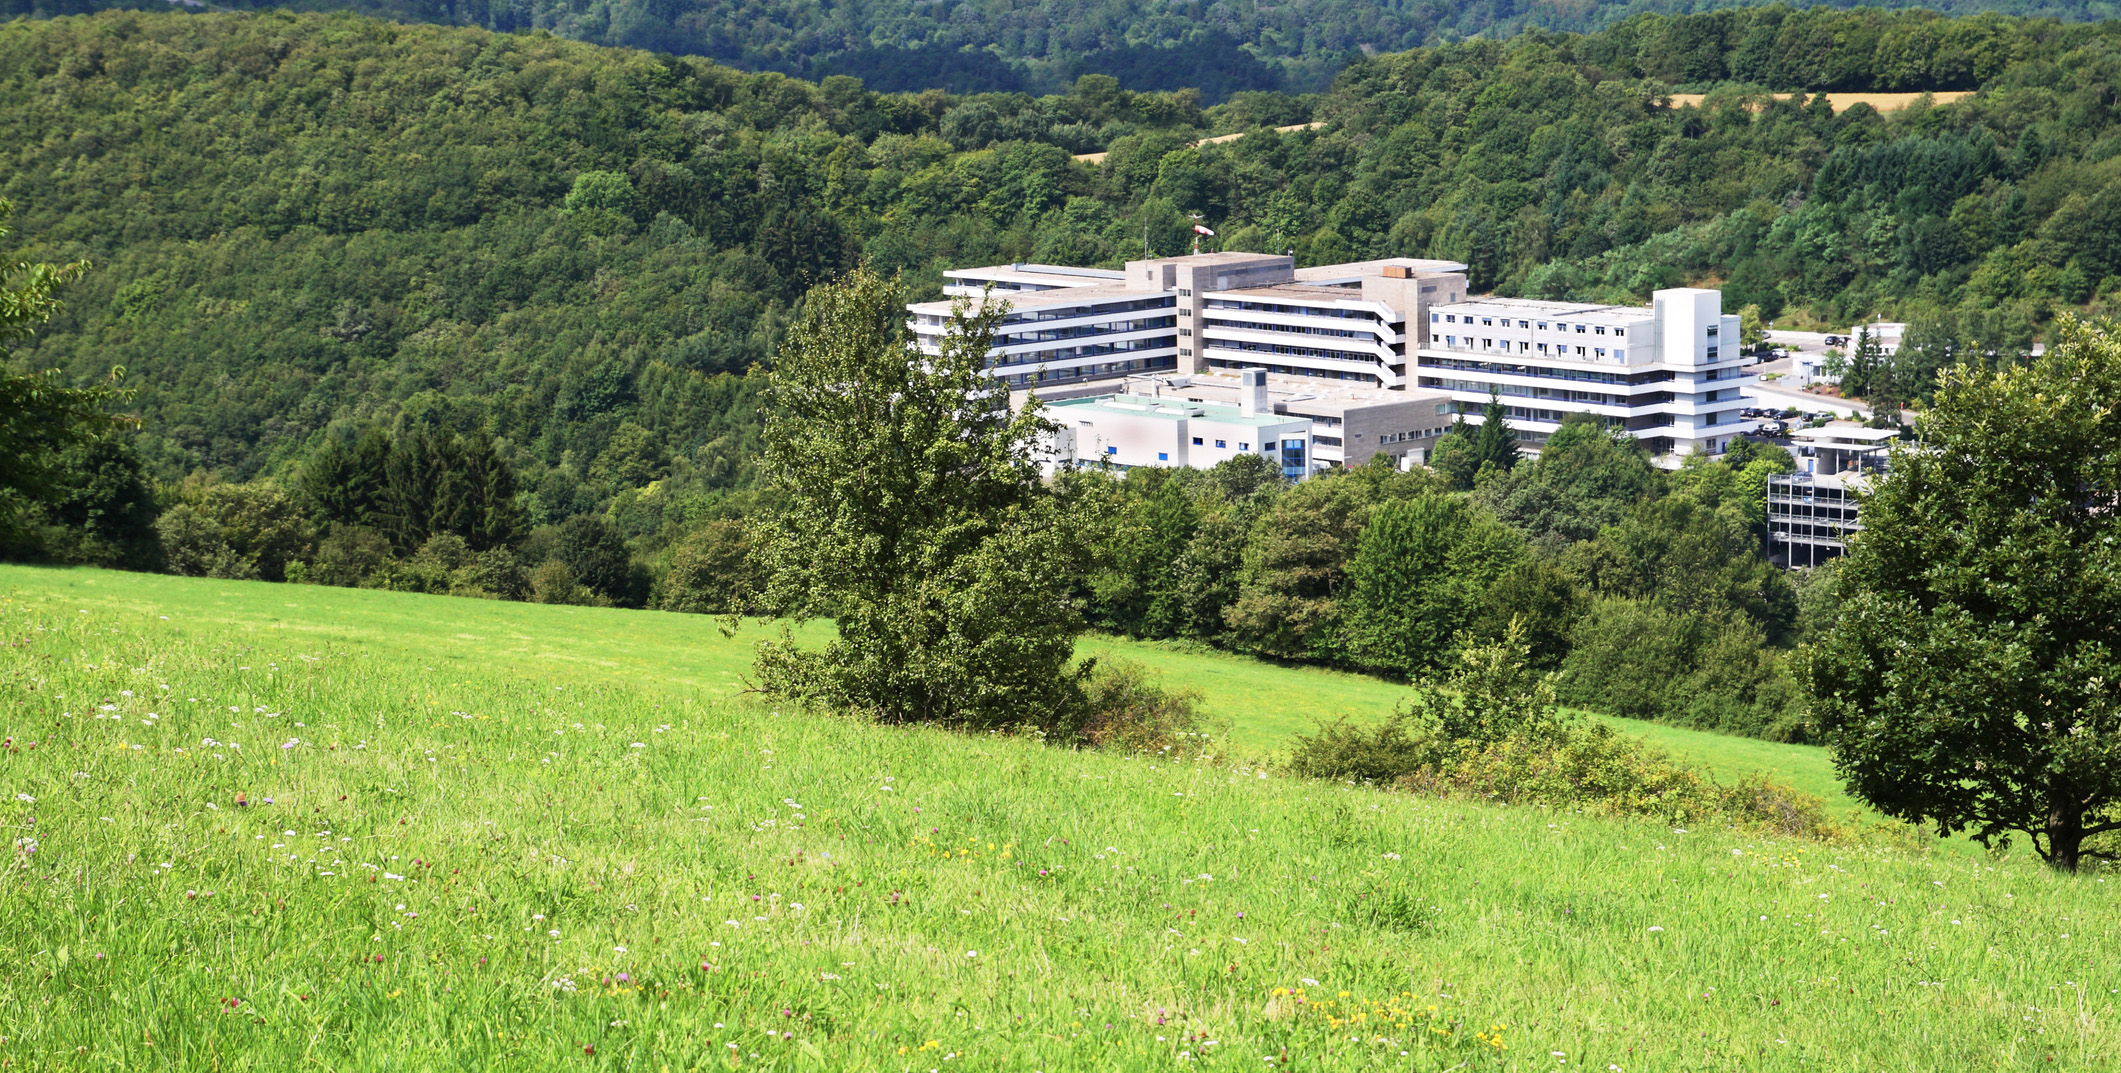 Photo of hospital building in a rural setting in the mountains